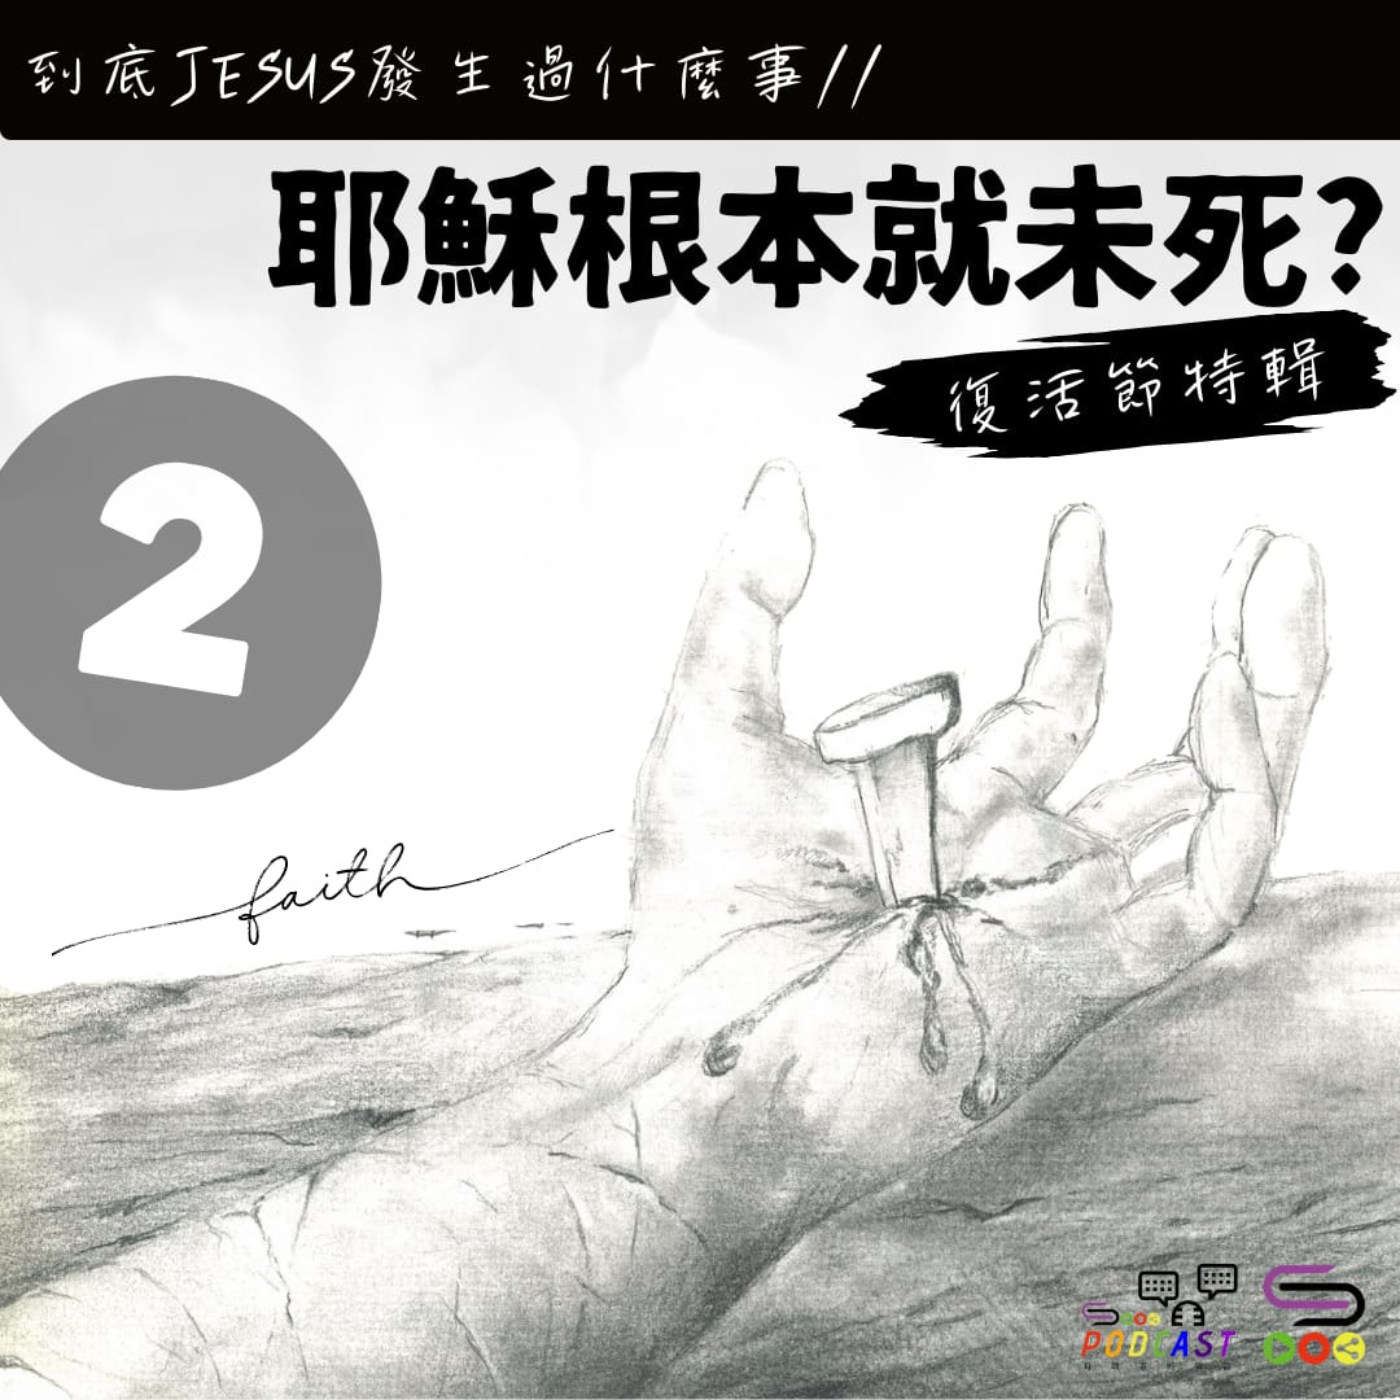 Artwork for podcast Sooo 特輯  社會故事的聲音